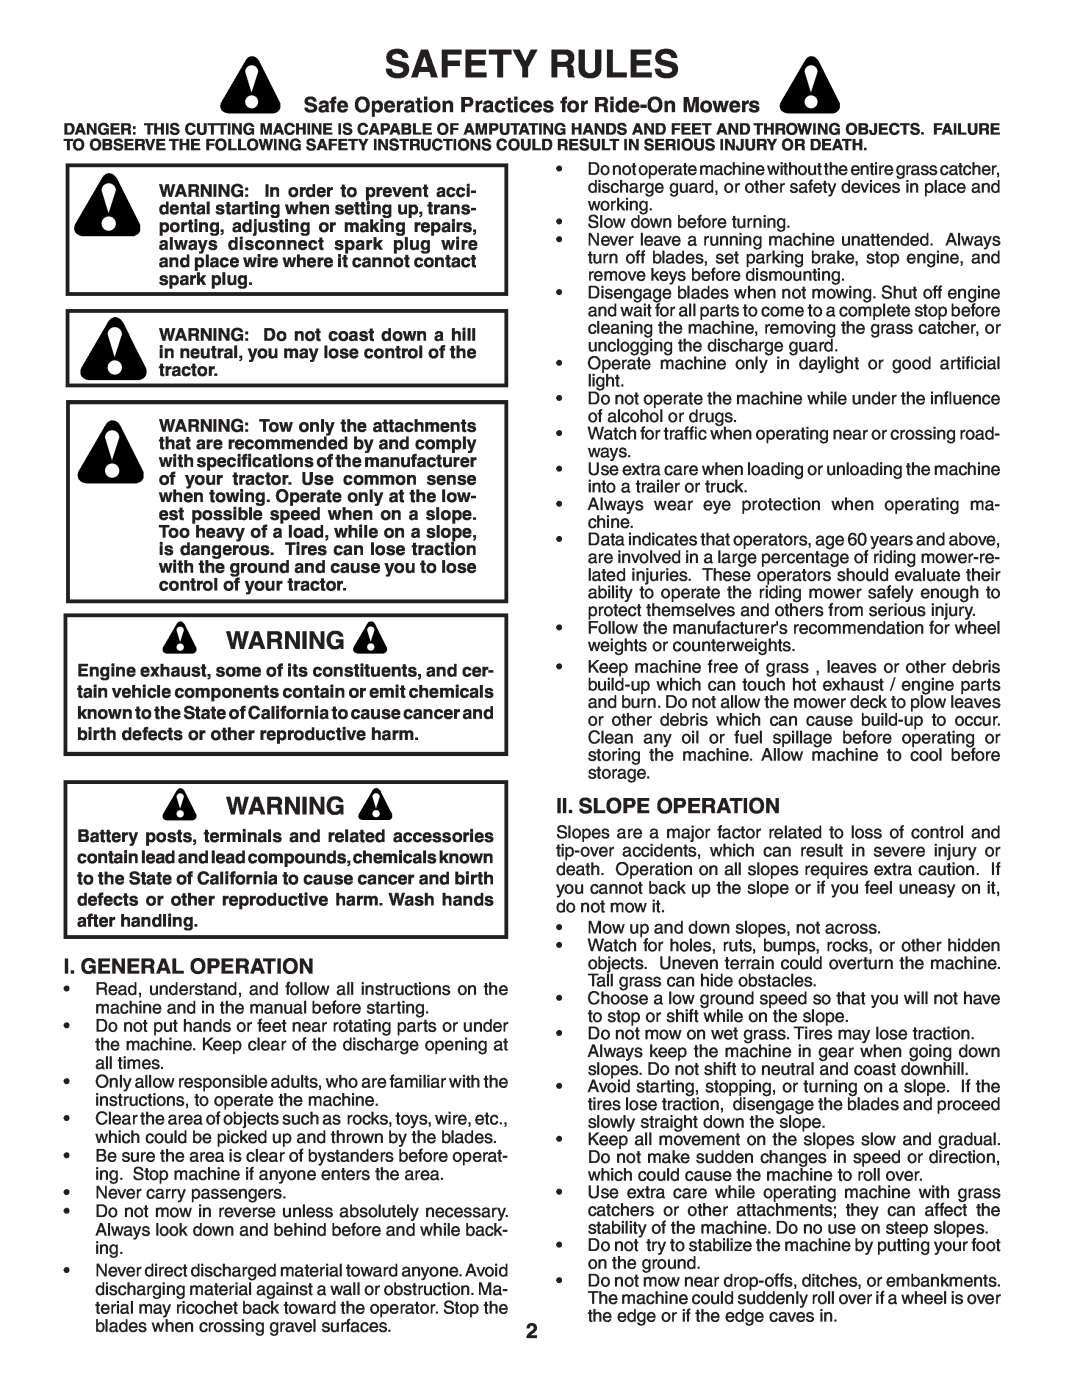 Poulan HD17542 manual Safety Rules, Safe Operation Practices for Ride-On Mowers, I. General Operation, Ii. Slope Operation 